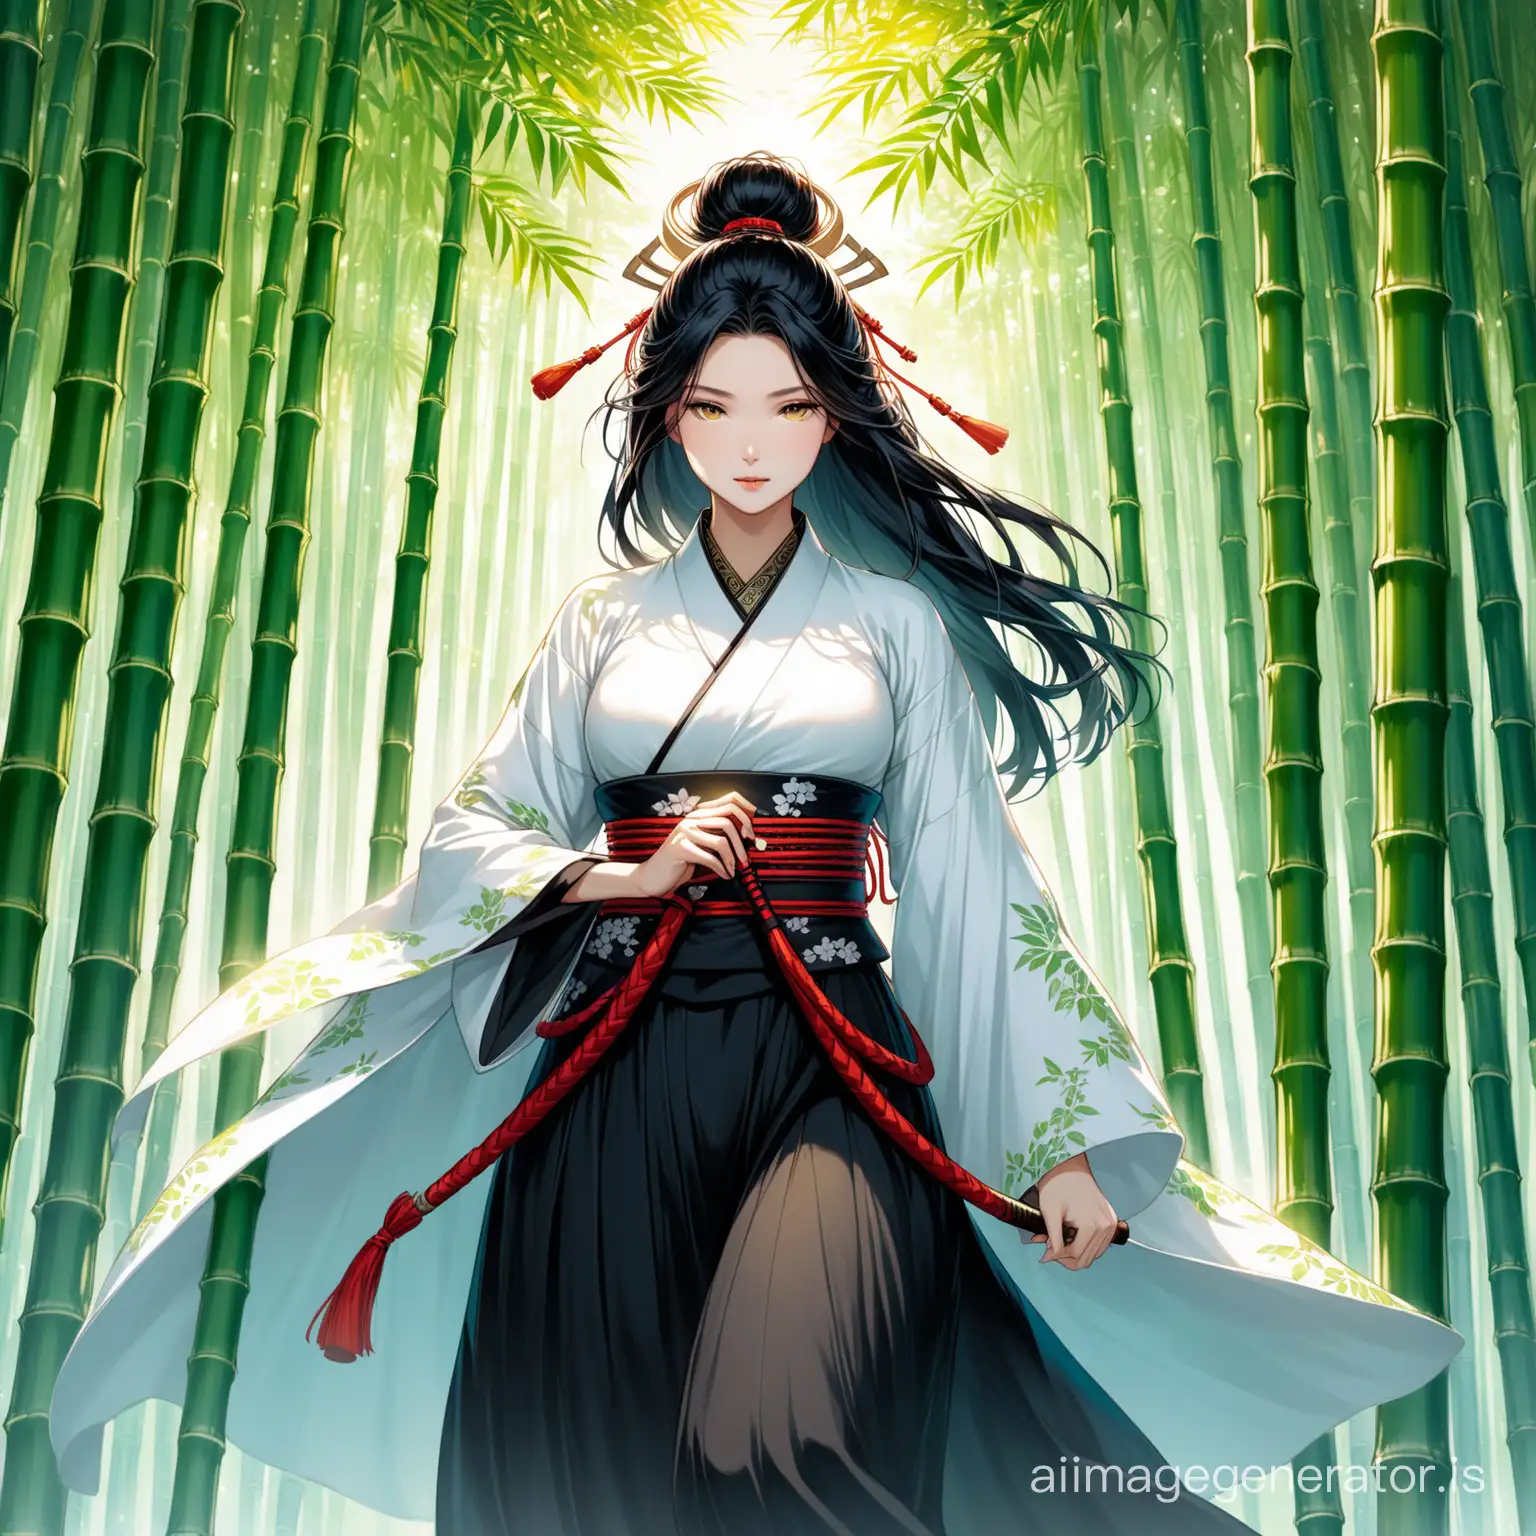 Imagine a mysterious female samurai, her presence a captivating blend of nature's essence and warrior's spirit. She wears a striking black and white Hanfu with an open back, symbolizing the harmony between light and darkness. Jet black hair cascades down her back like a waterfall of shadows, framing features that emanate with an otherworldly radiance. Her skin, a fusion of human and plant matter, glows with an ethereal luminescence, while her eyes pierce the soul with their vivid yellow hue, reflecting a primal wisdom born of the earth itself. Adorned with intricate floral patterns that intertwine with her attire, she exudes an aura of mystery and power, a testament to her harmonious bond with the natural world. Set her amidst a tranquil bamboo grove or beneath the canopy of a sacred tree, where the serenity of her surroundings mirrors the strength and grace of her spirit. Capture the essence of her resilience, beauty, and connection to nature in your depiction.